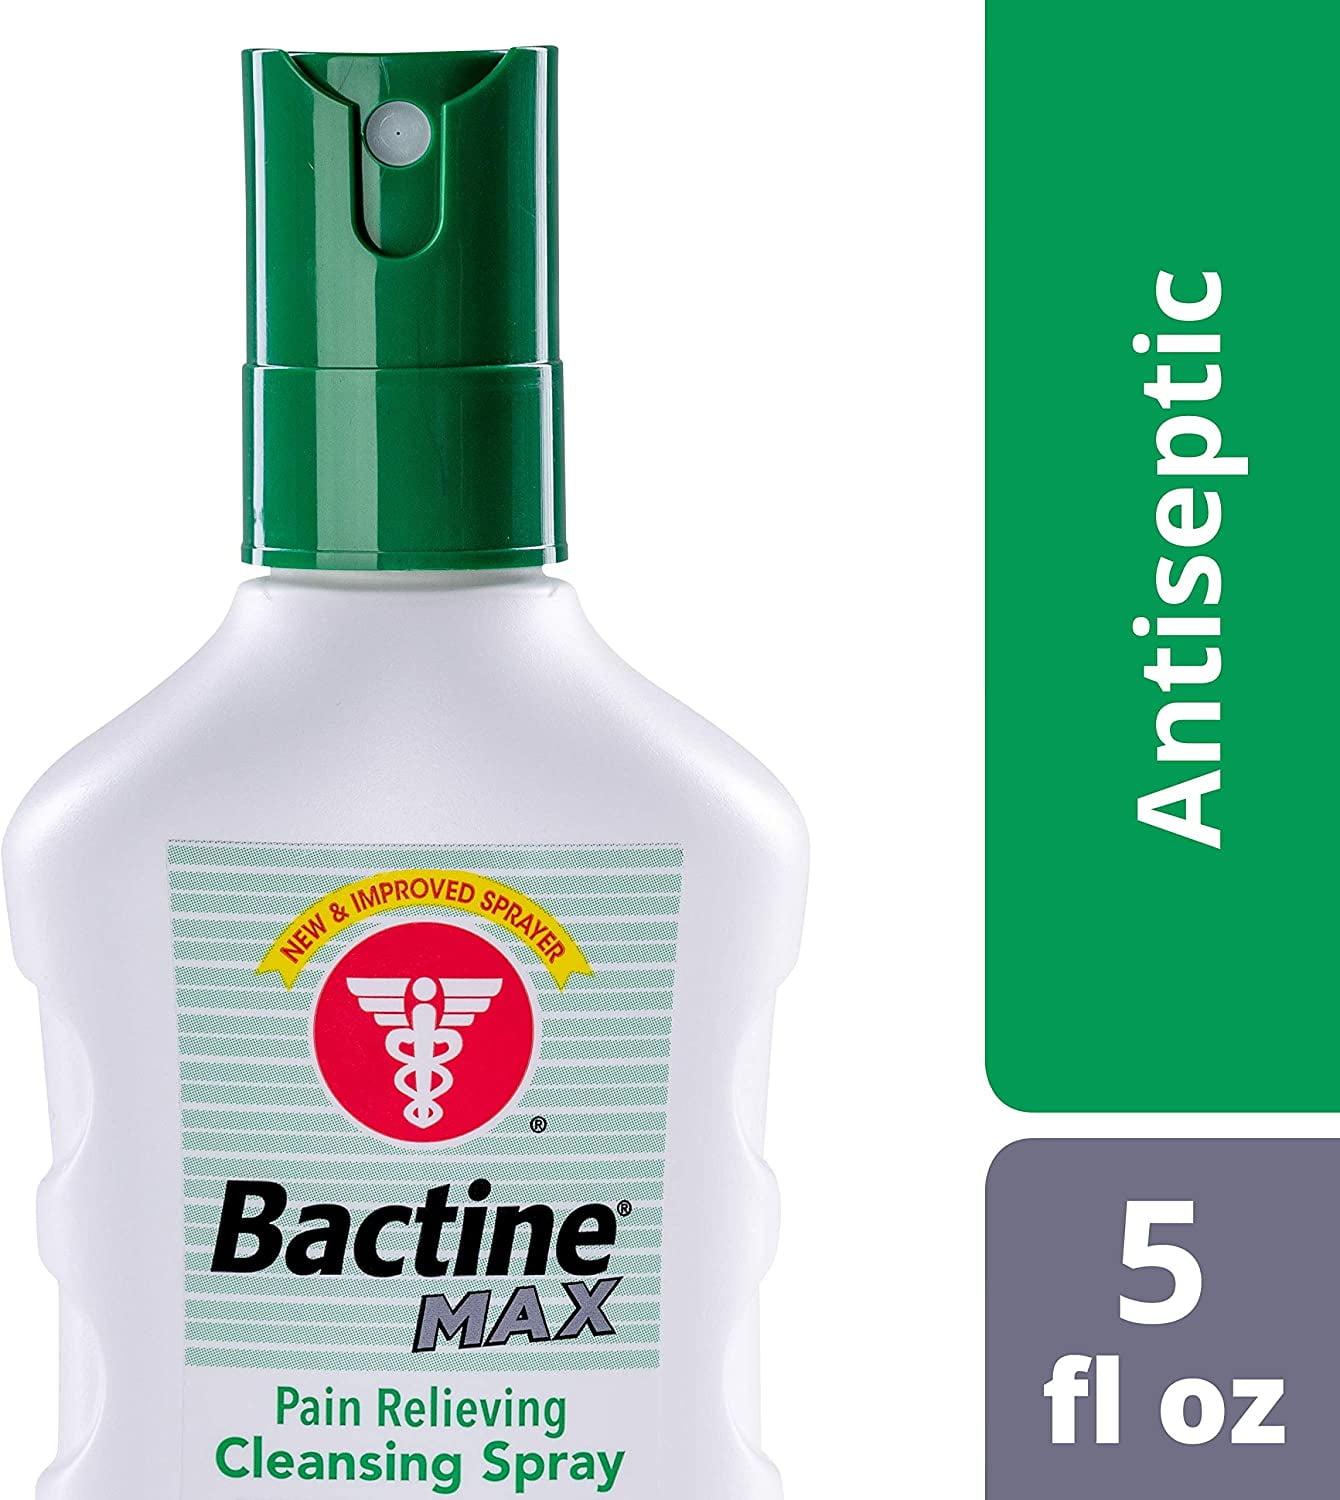 Amazon.com: Bactine MAX First Aid Spray - Pain Relief Cleansing Spray with  4% Lidocaine - Numbing Lidocaine Spray Kills 99.9% of Germs - Pain + Itch  Relief for Minor Cuts, Burns &